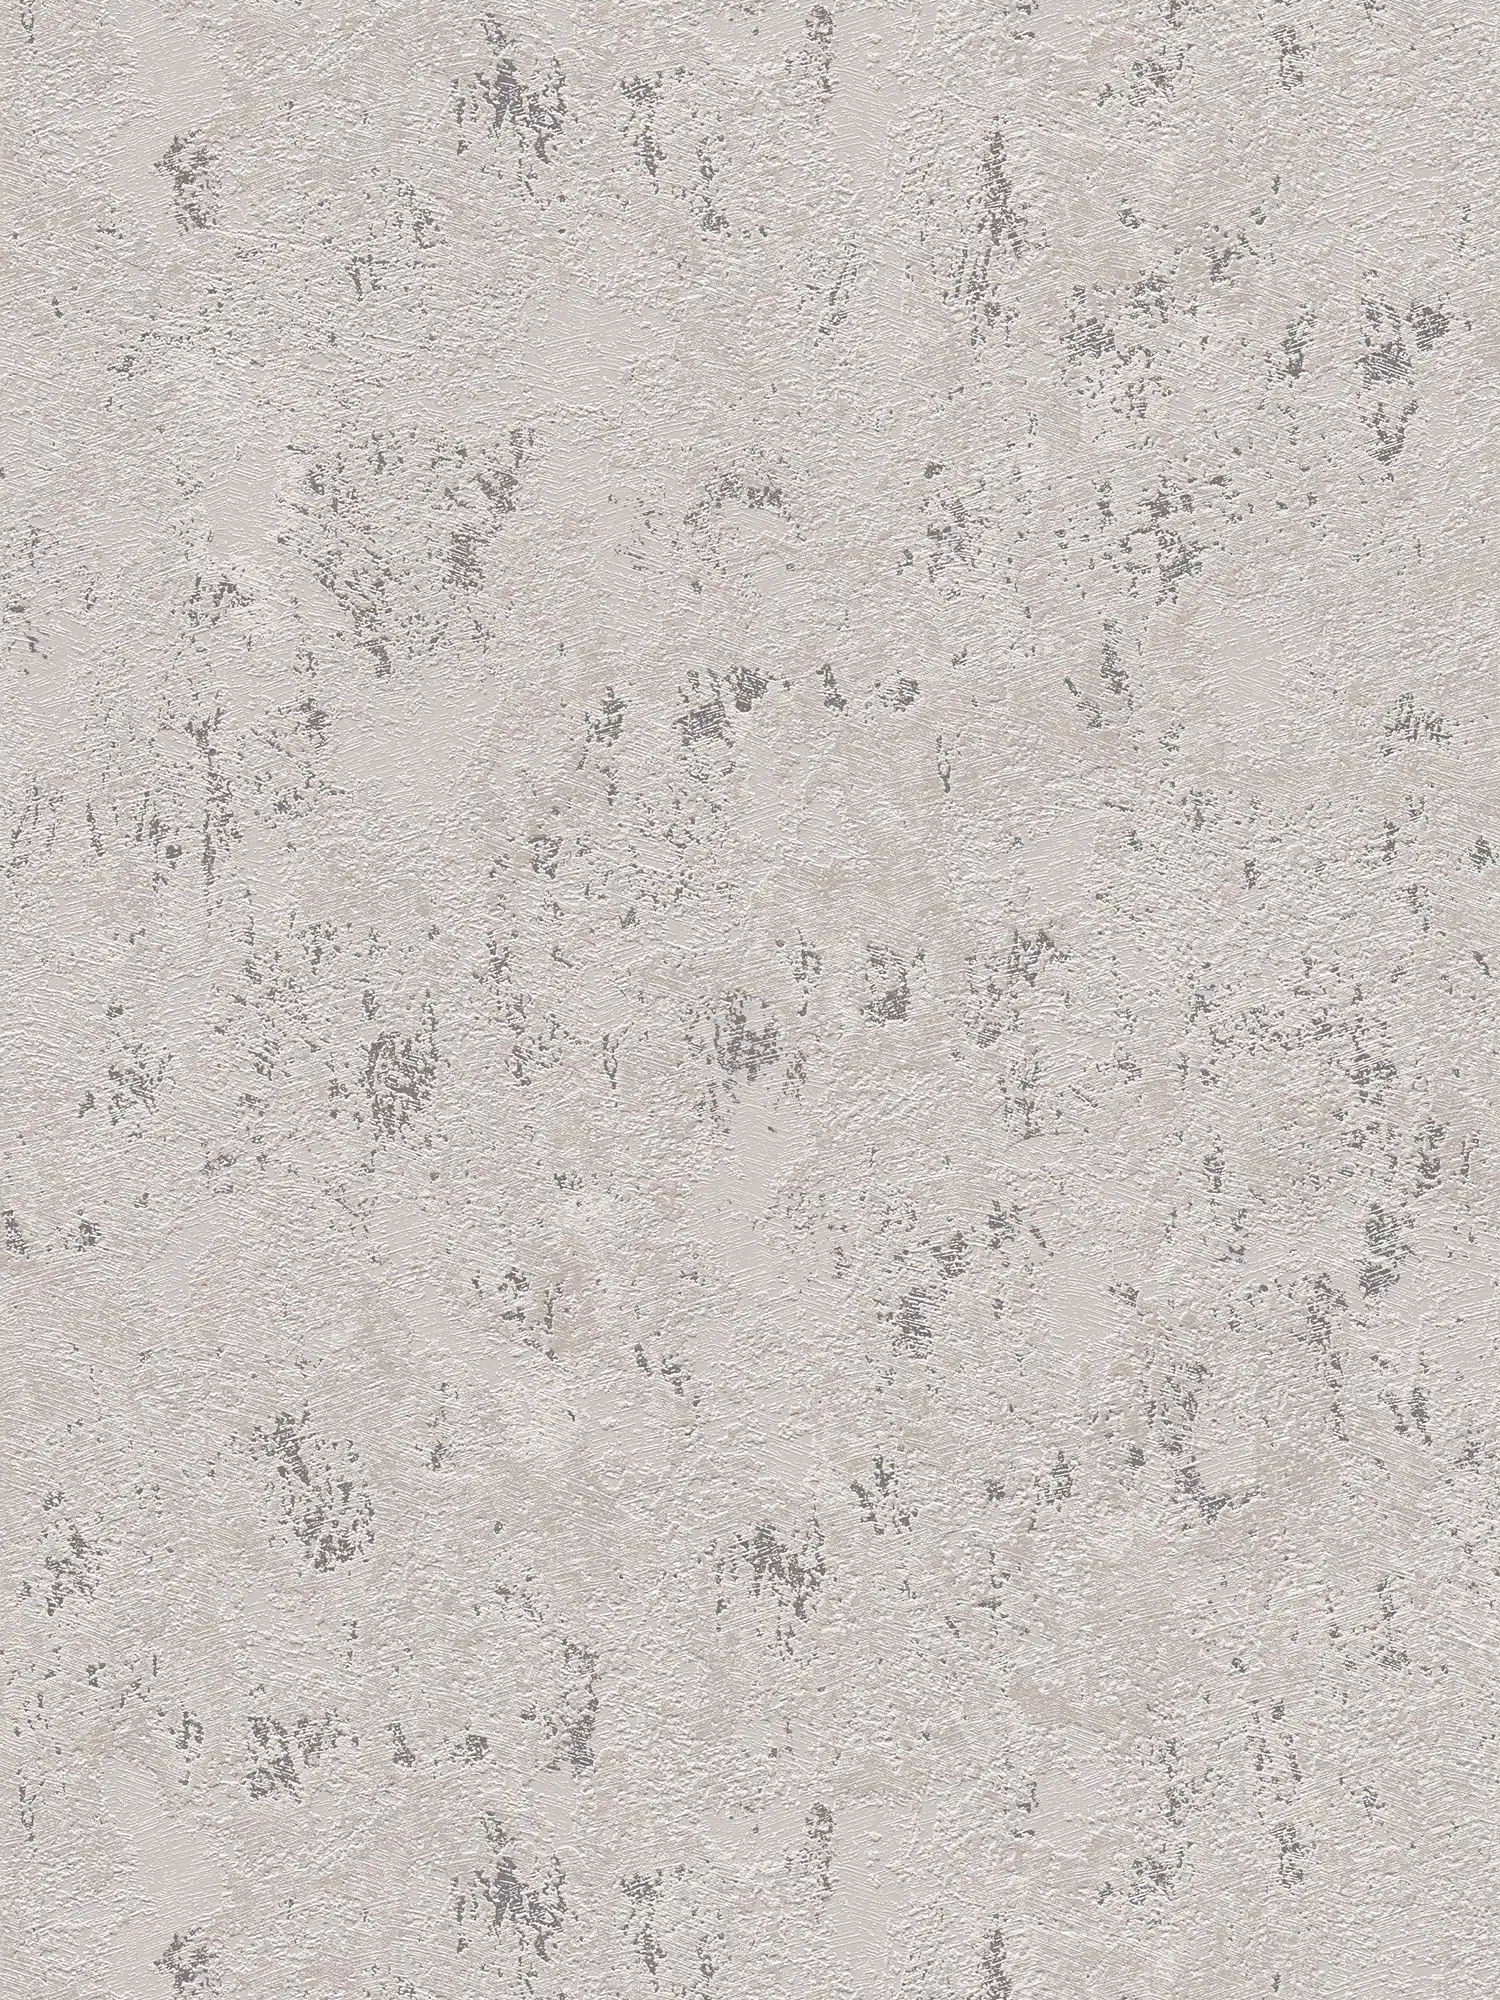 Non-woven wallpaper in a coarse plaster look with accents - grey, beige, silver
